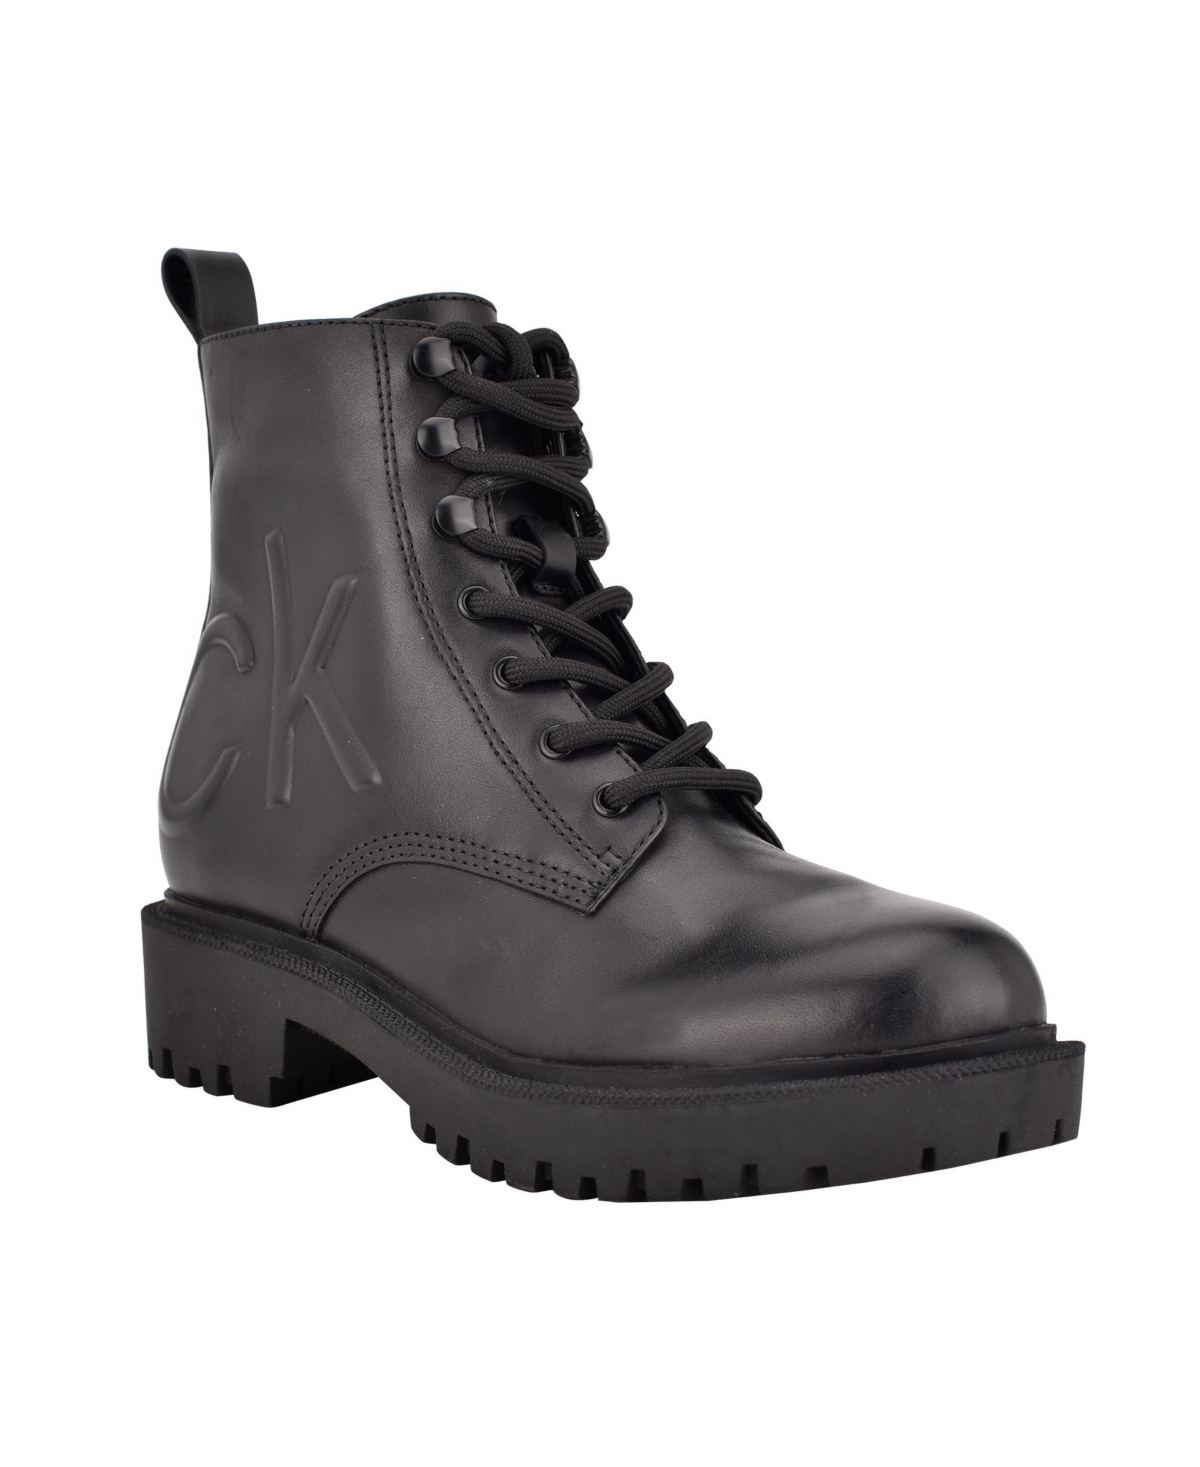 UPC 195972015975 product image for Calvin Klein Women's Kamry Lace Up Logo Lug Sole Combat Booties Women's Shoes | upcitemdb.com